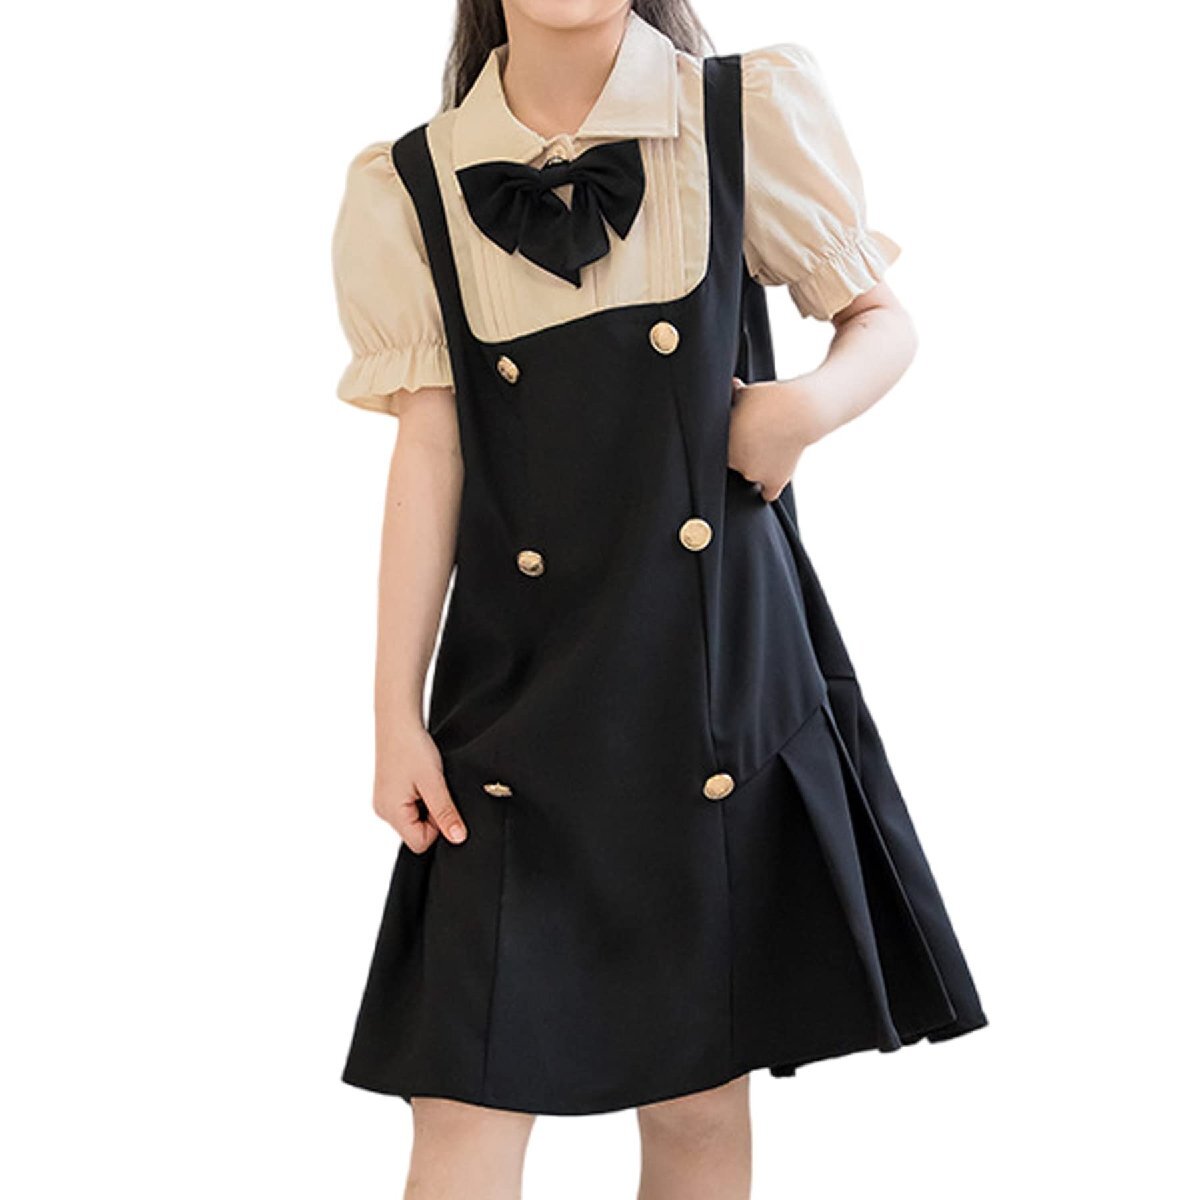 [YY-Natuhi] child clothes girl One-piece dress overall skirt short sleeves piling put on manner ribbon Kids girls tunic formal 